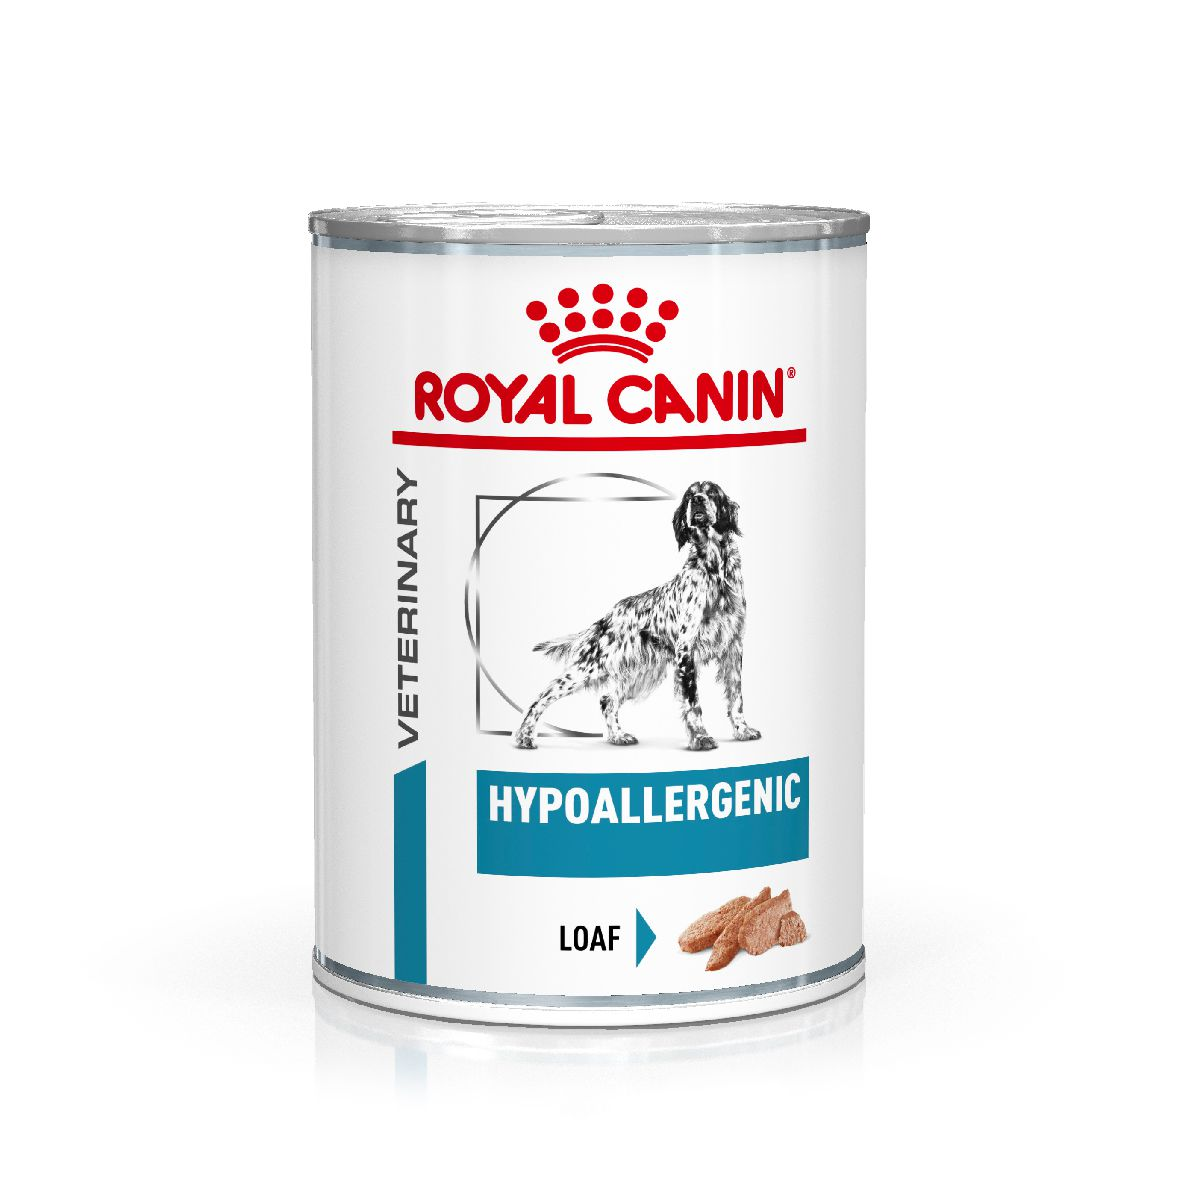 royal canin hypoallergenic wet